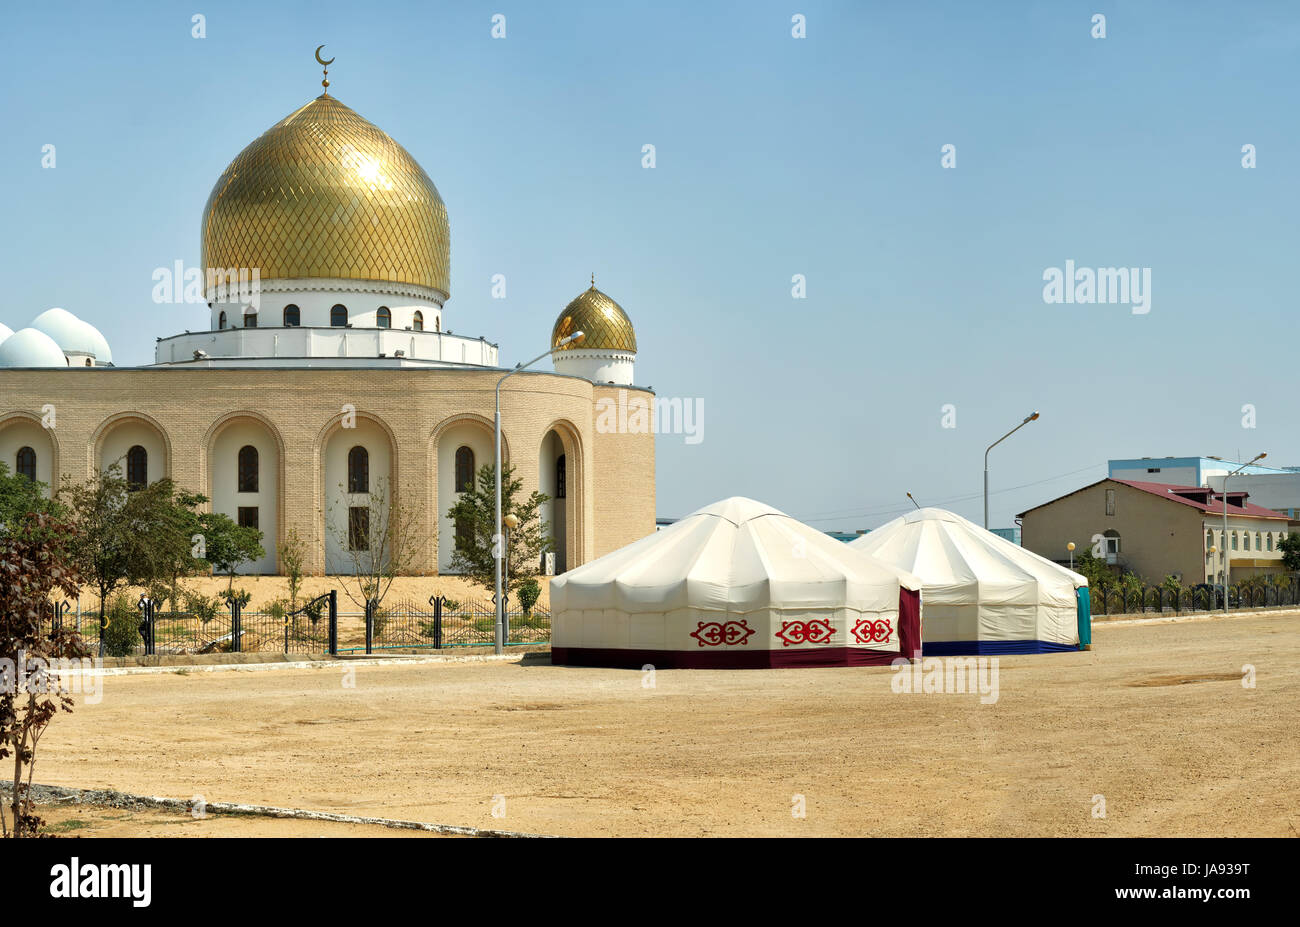 house, building, religion, religious, city, town, culture, asia, dome, summer, Stock Photo